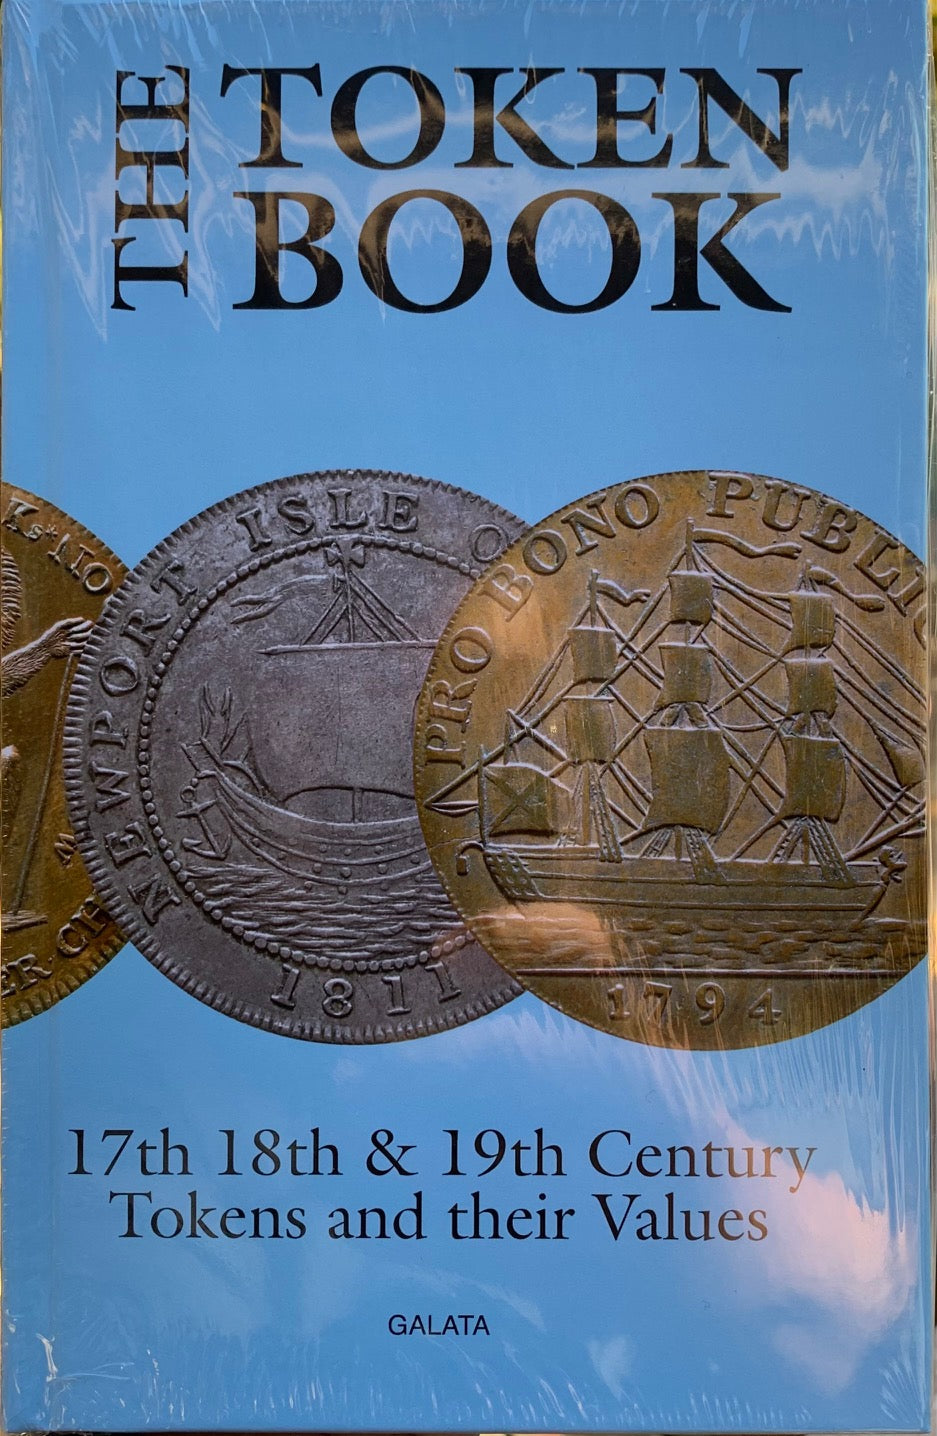 The Token Book - 17th 18th & 19th Century Tokens and their Values